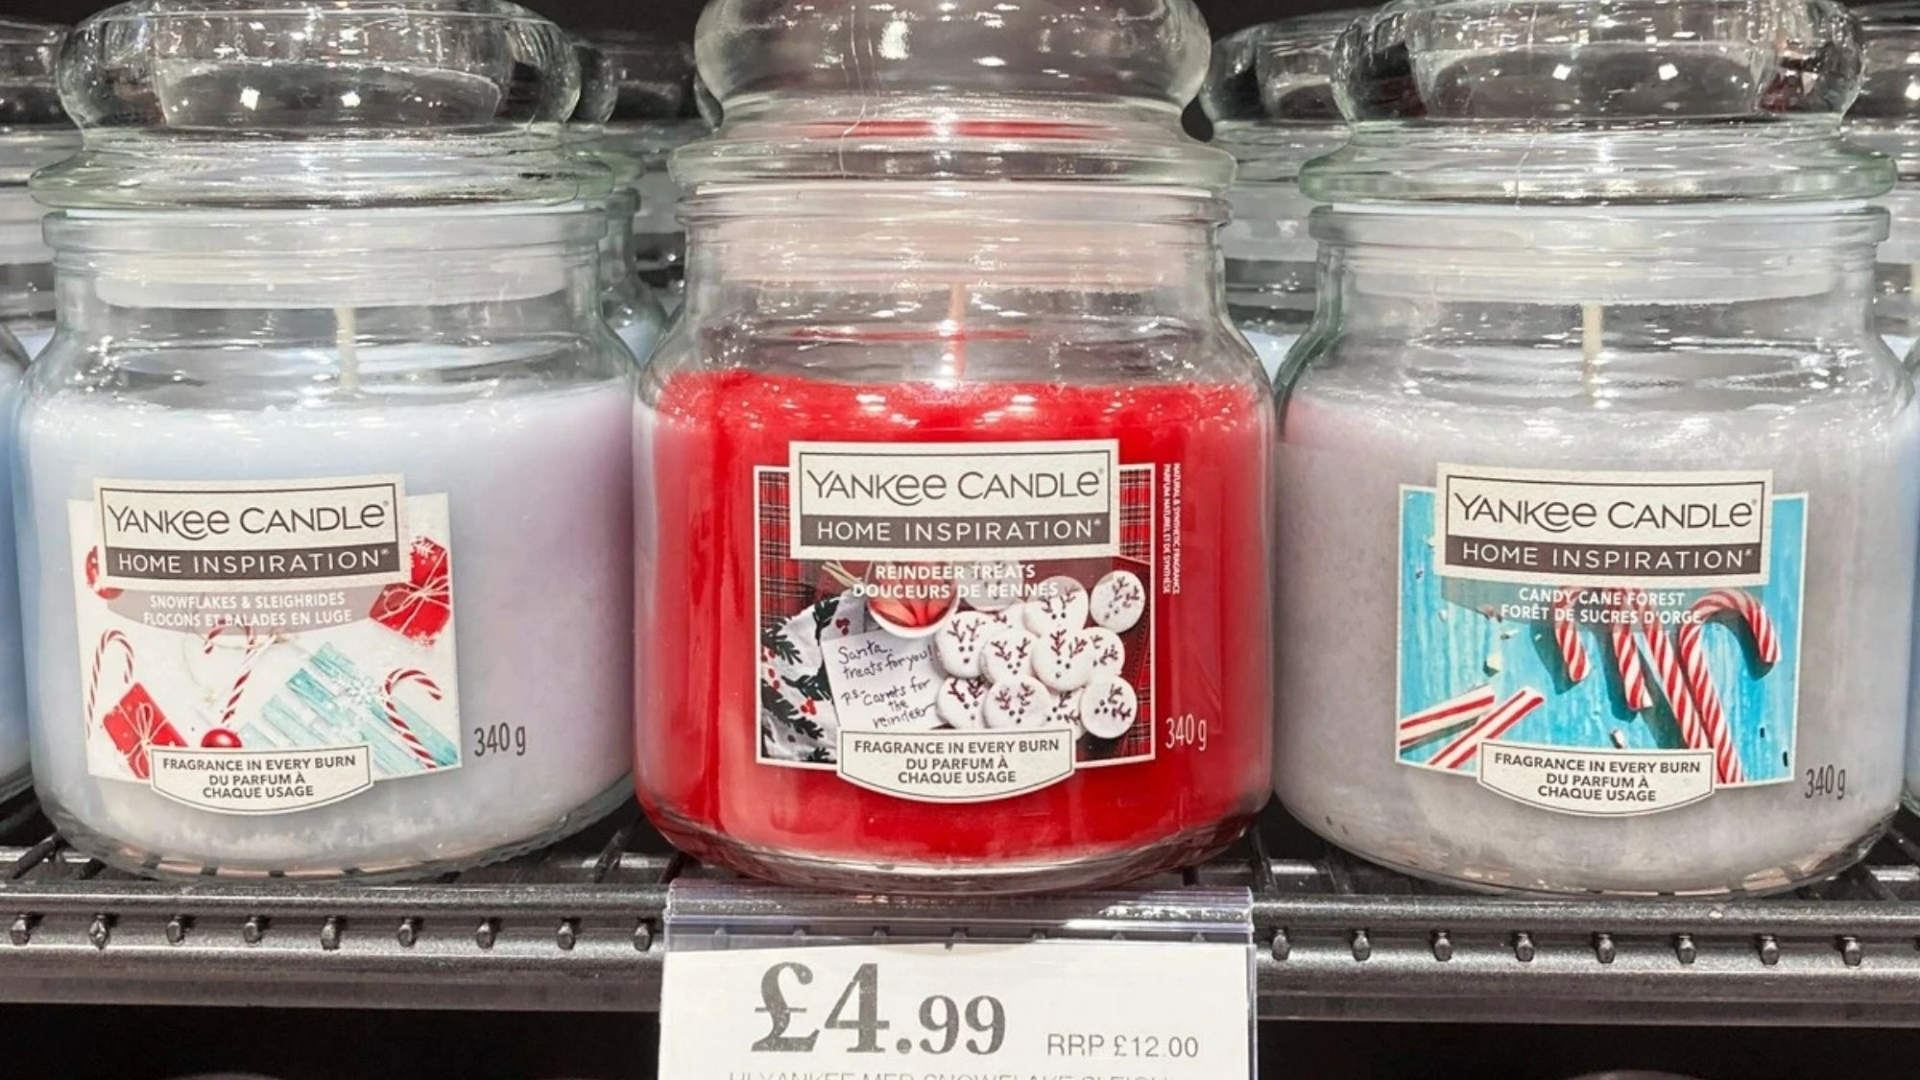 Yankee Candles at Home Bargains are a hot item among shoppers.